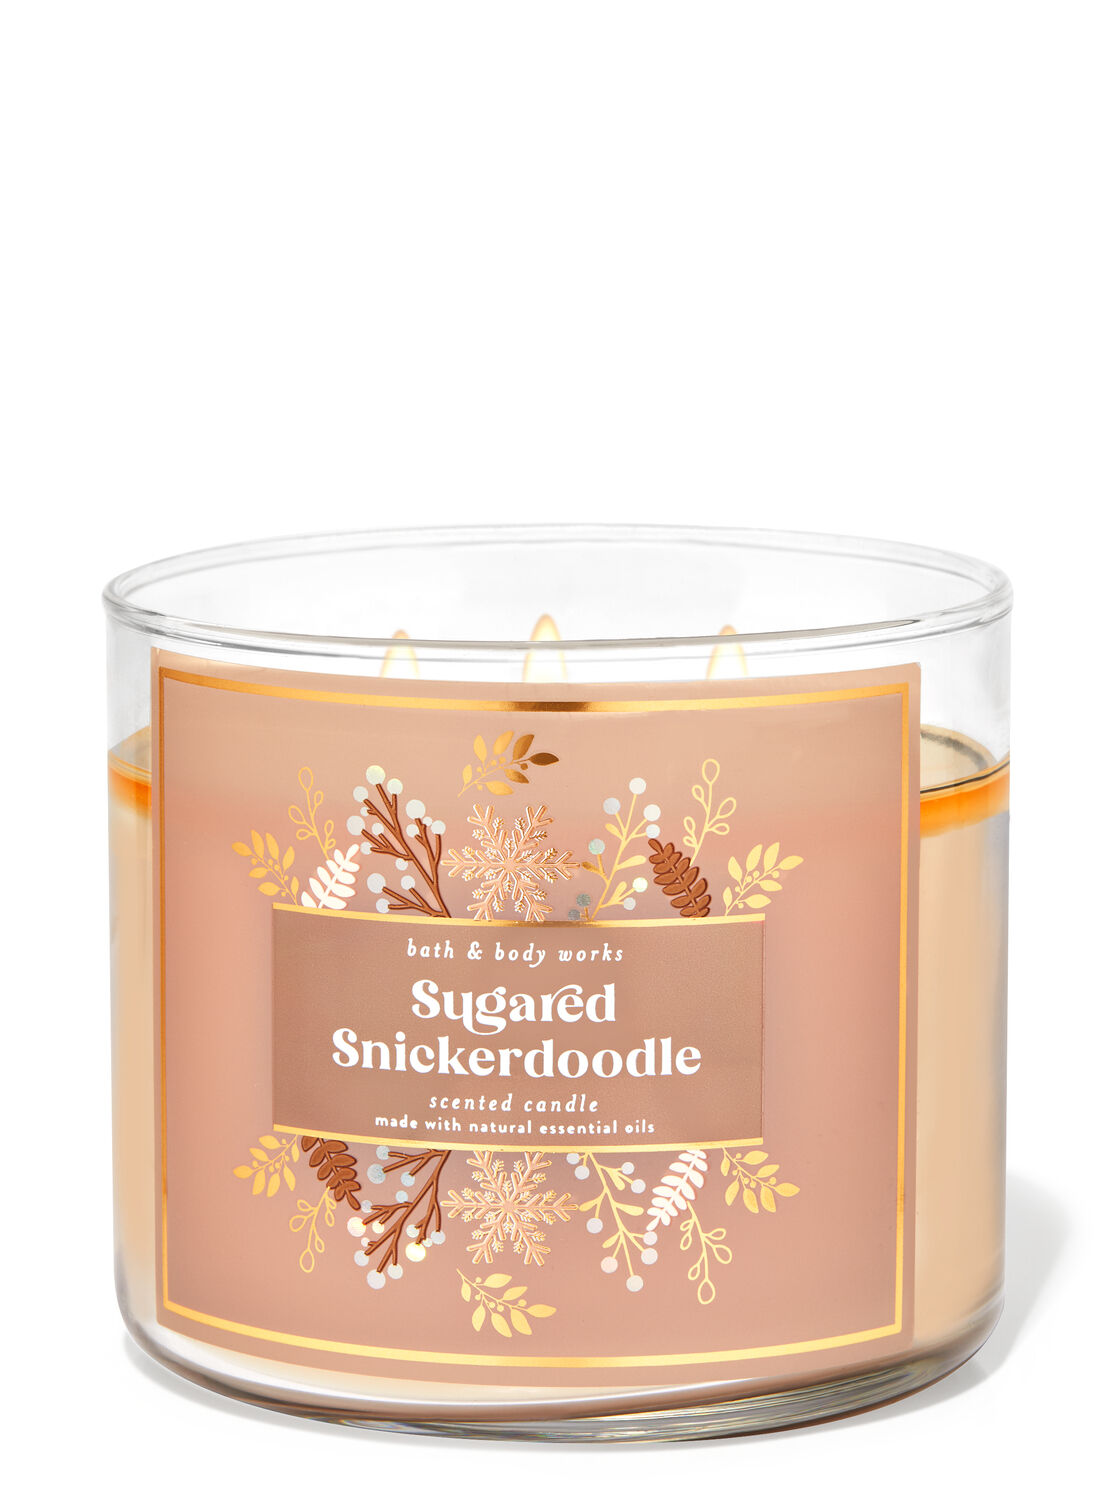 Bath And Body Works SUGARED SNICKERDOODLE Candle 3-Wick Scented NEW FreeShipUSA 